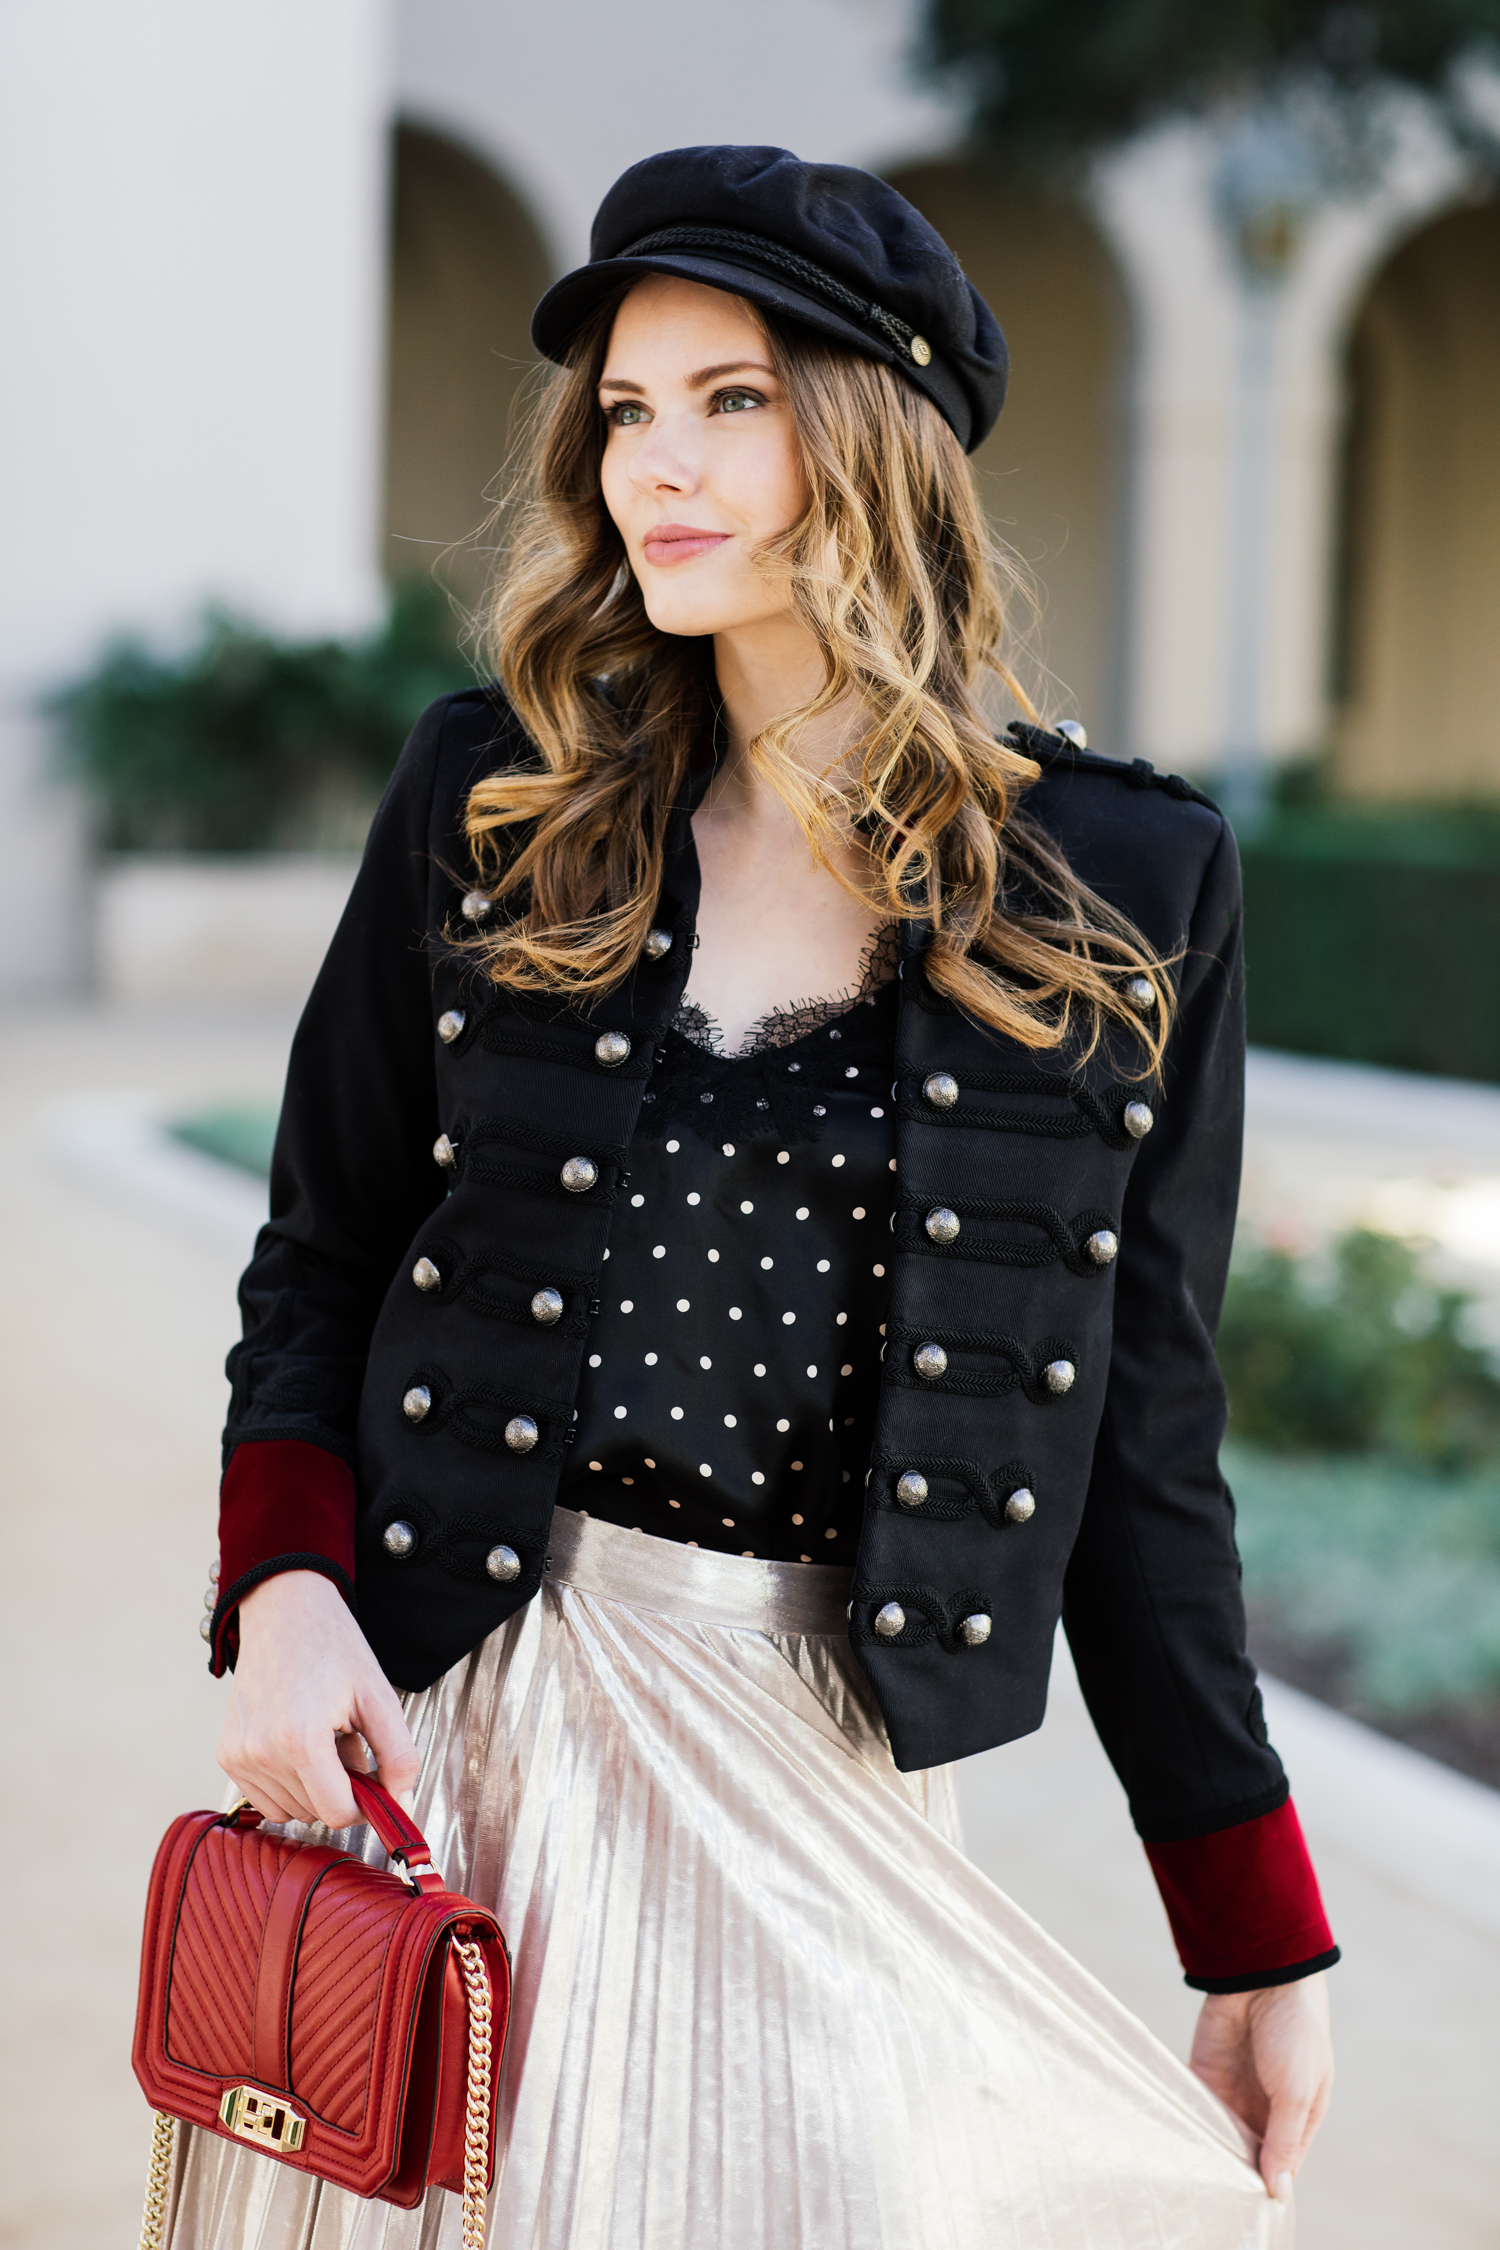 Alyssa Campanella of The A List blog wearing The Kooples military jacket and 1. State pleated skirt